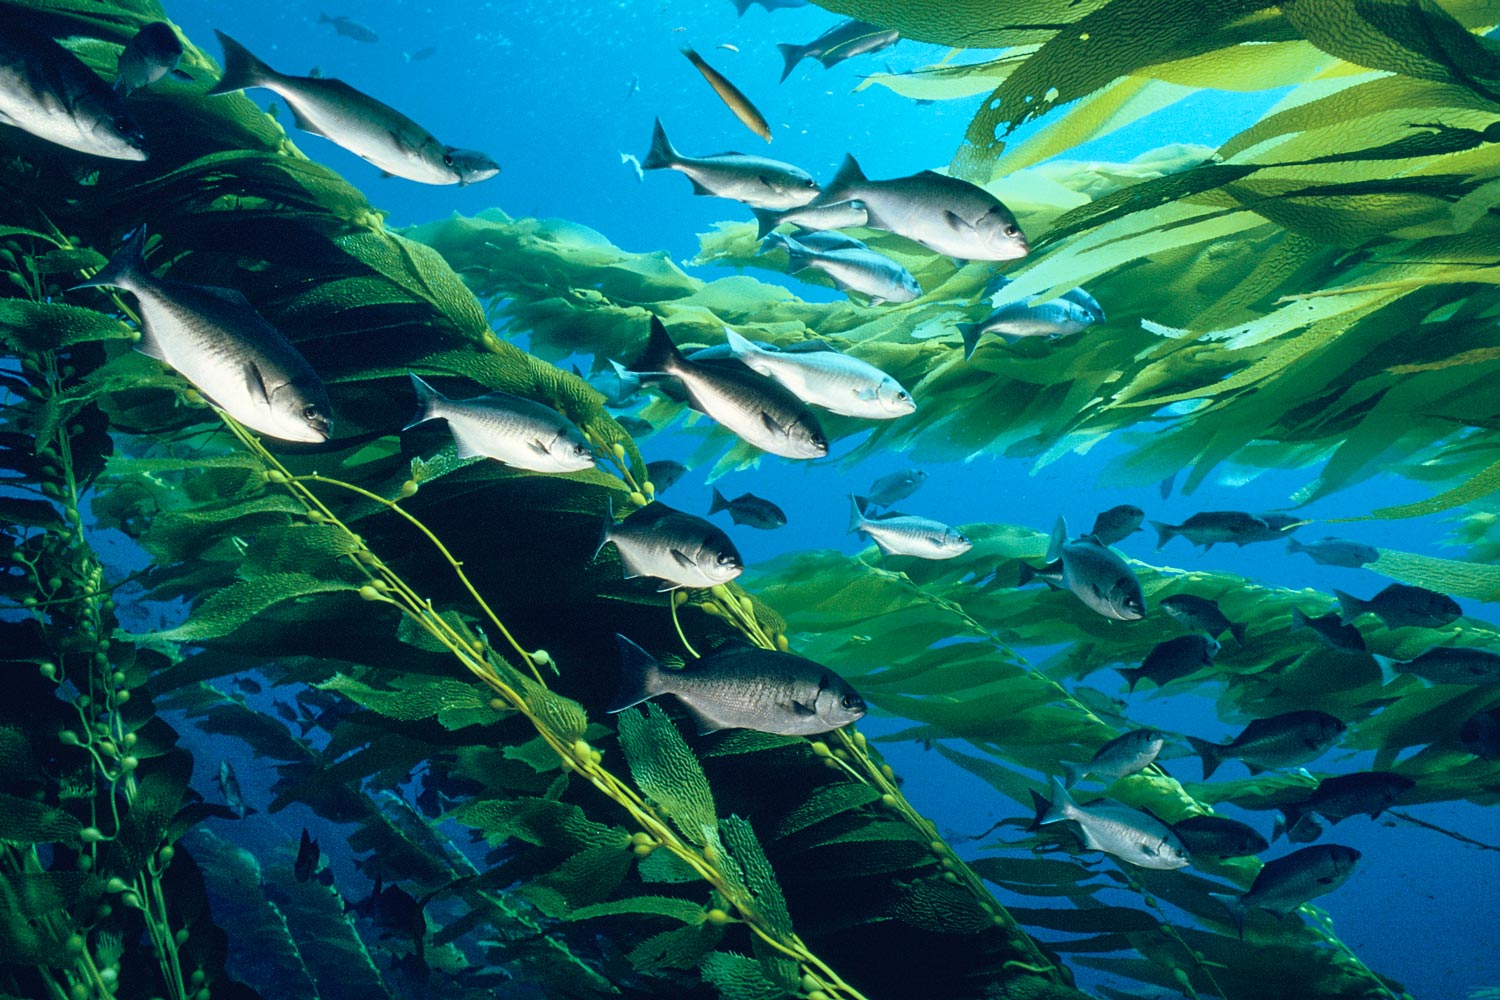 Kelp forests with fish in the ocean